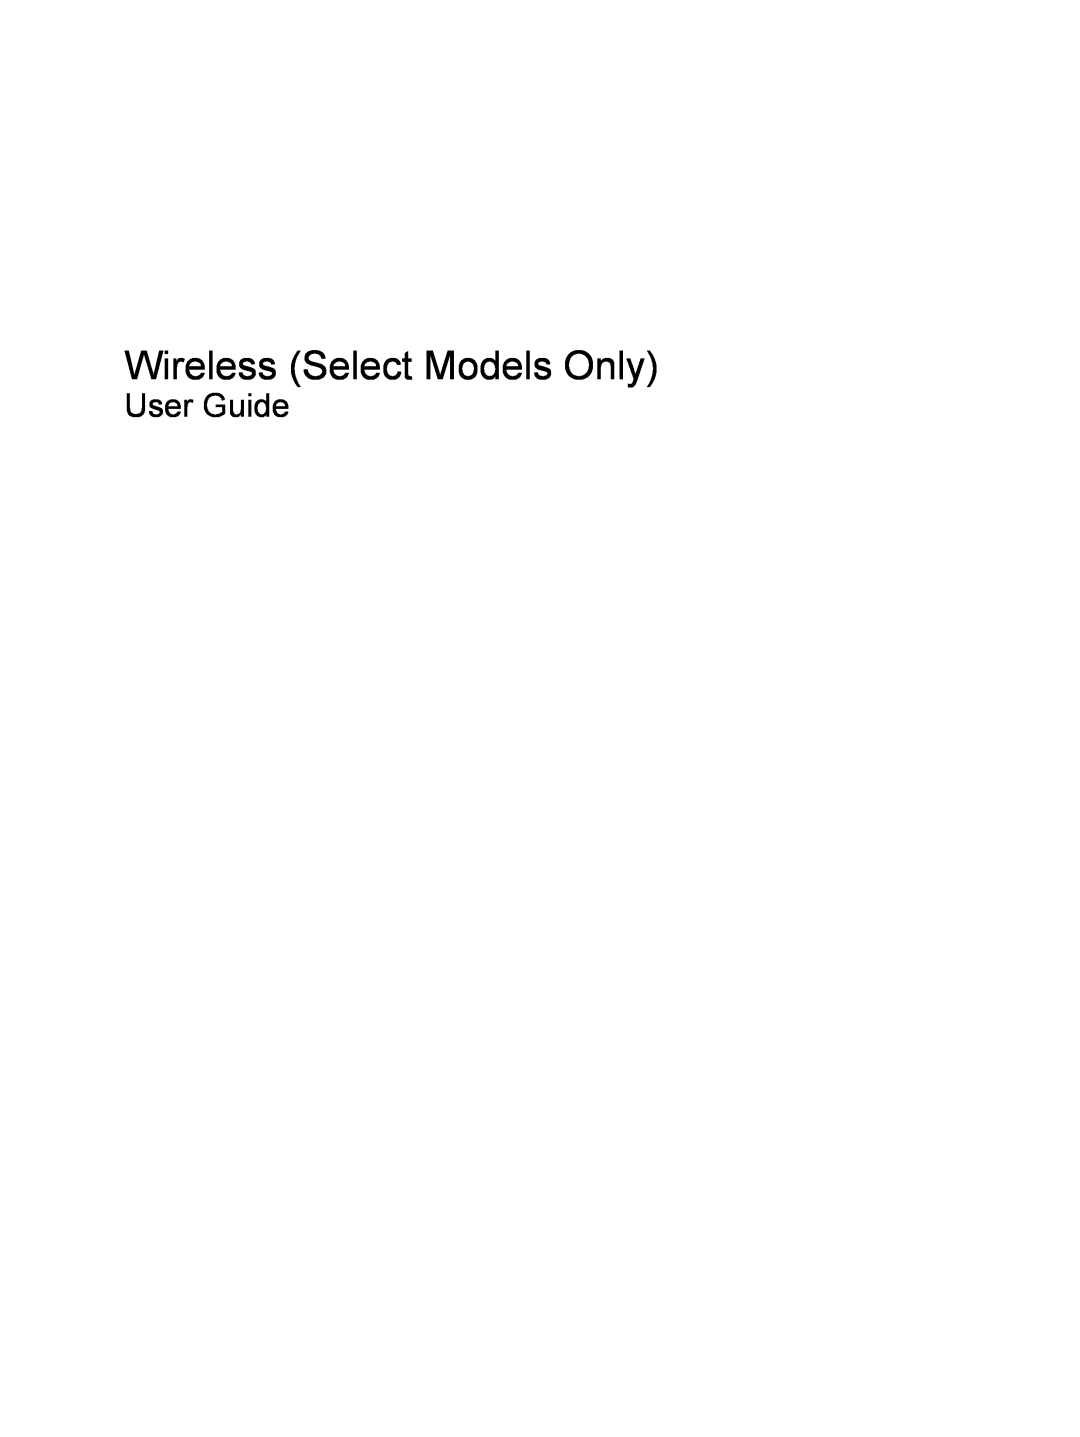 HP V6905TU, V6903TU, V6705TU, V6703AU, V6702TU, V6701XX, V6702AU, V6618AU, V6620US manual Wireless Select Models Only, User Guide 